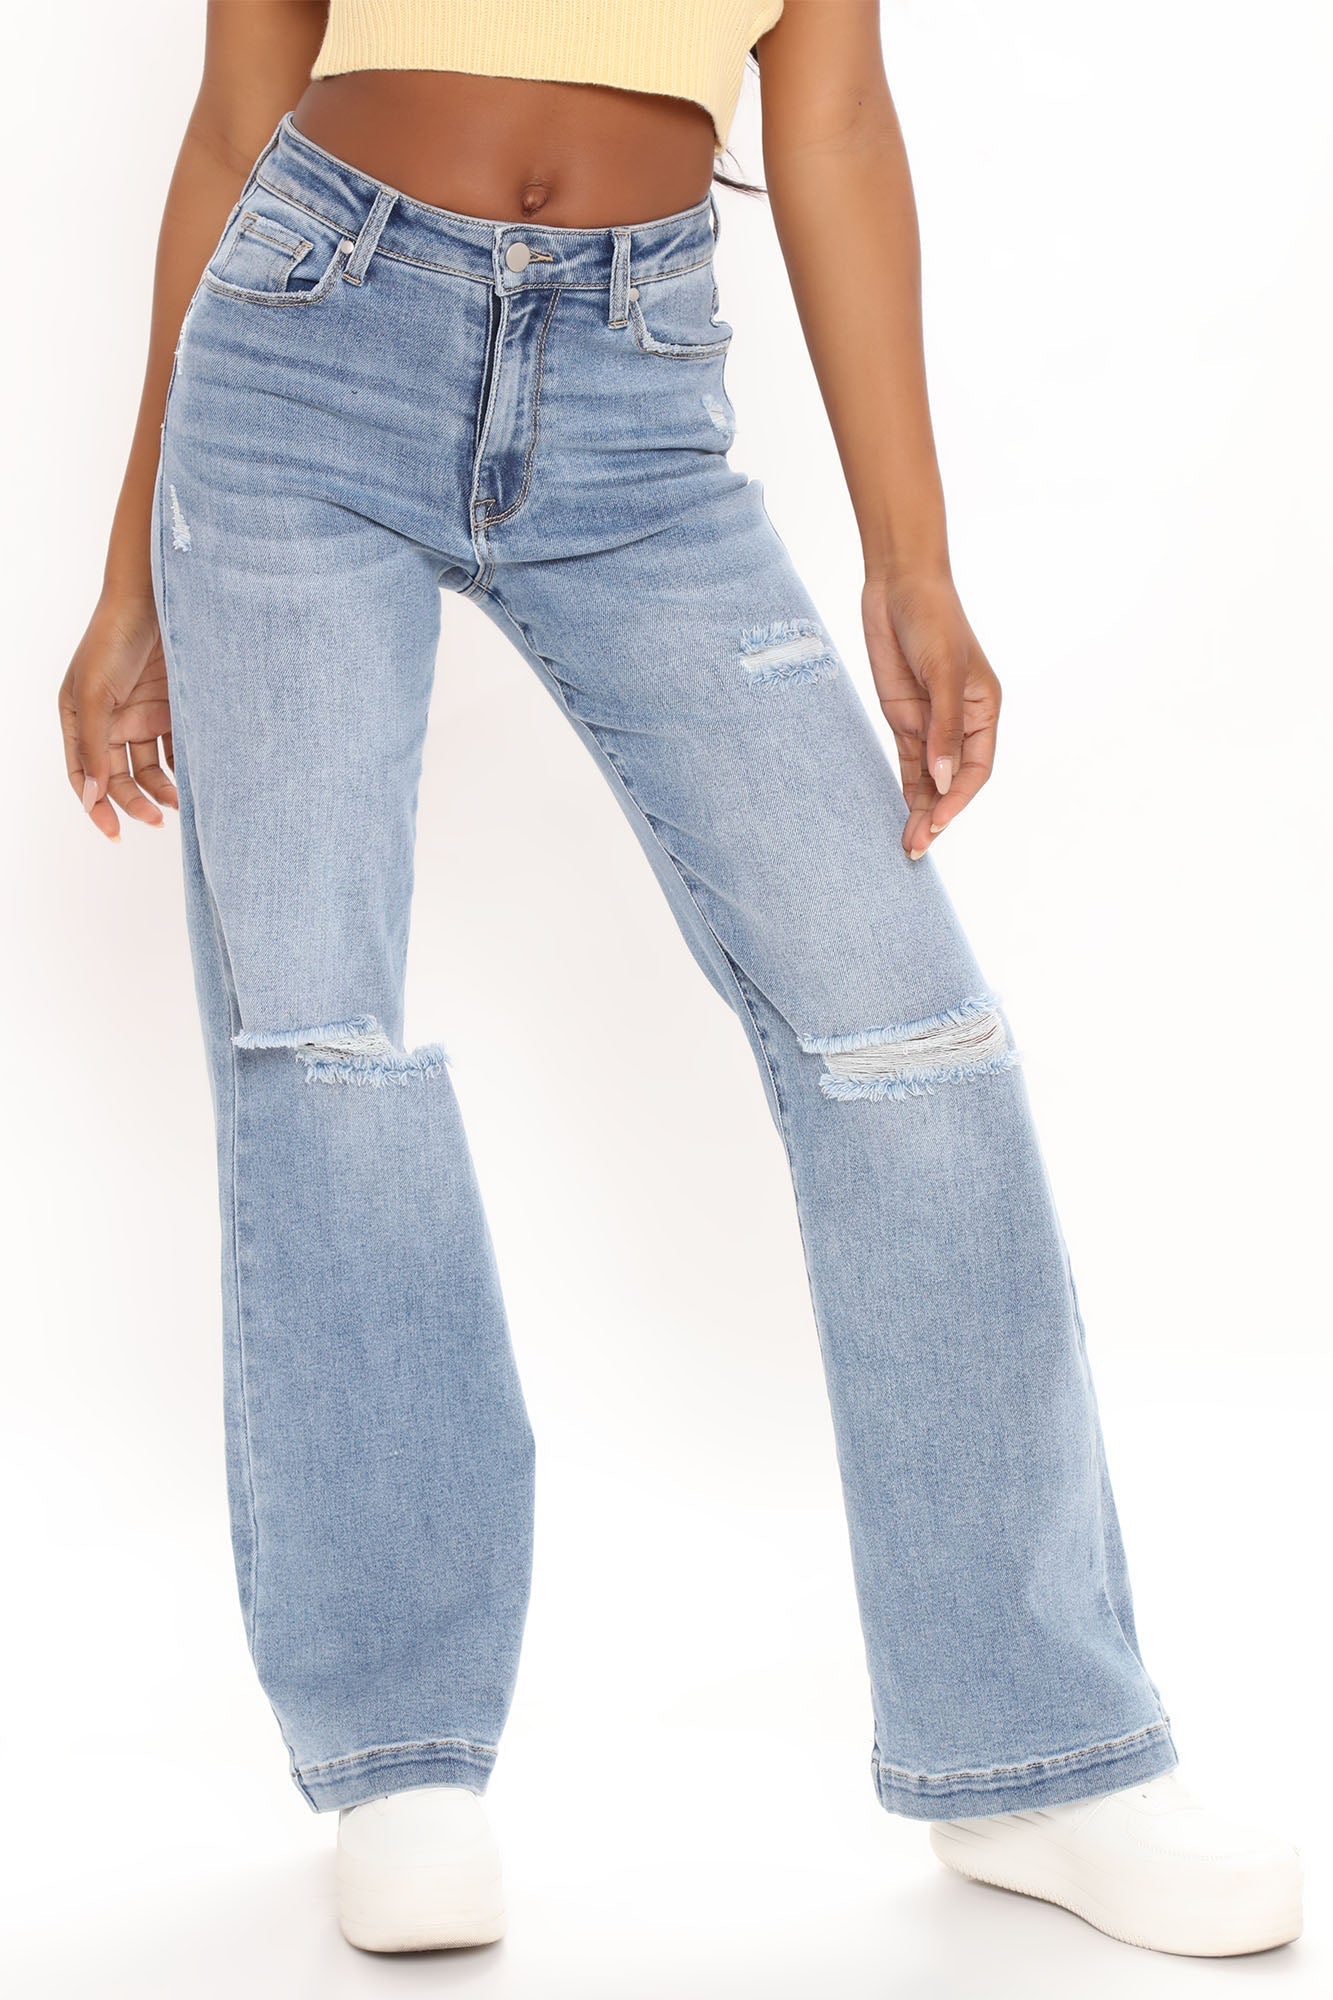 Longing For You Distressed Wide Leg Jeans - Medium Blue Wash